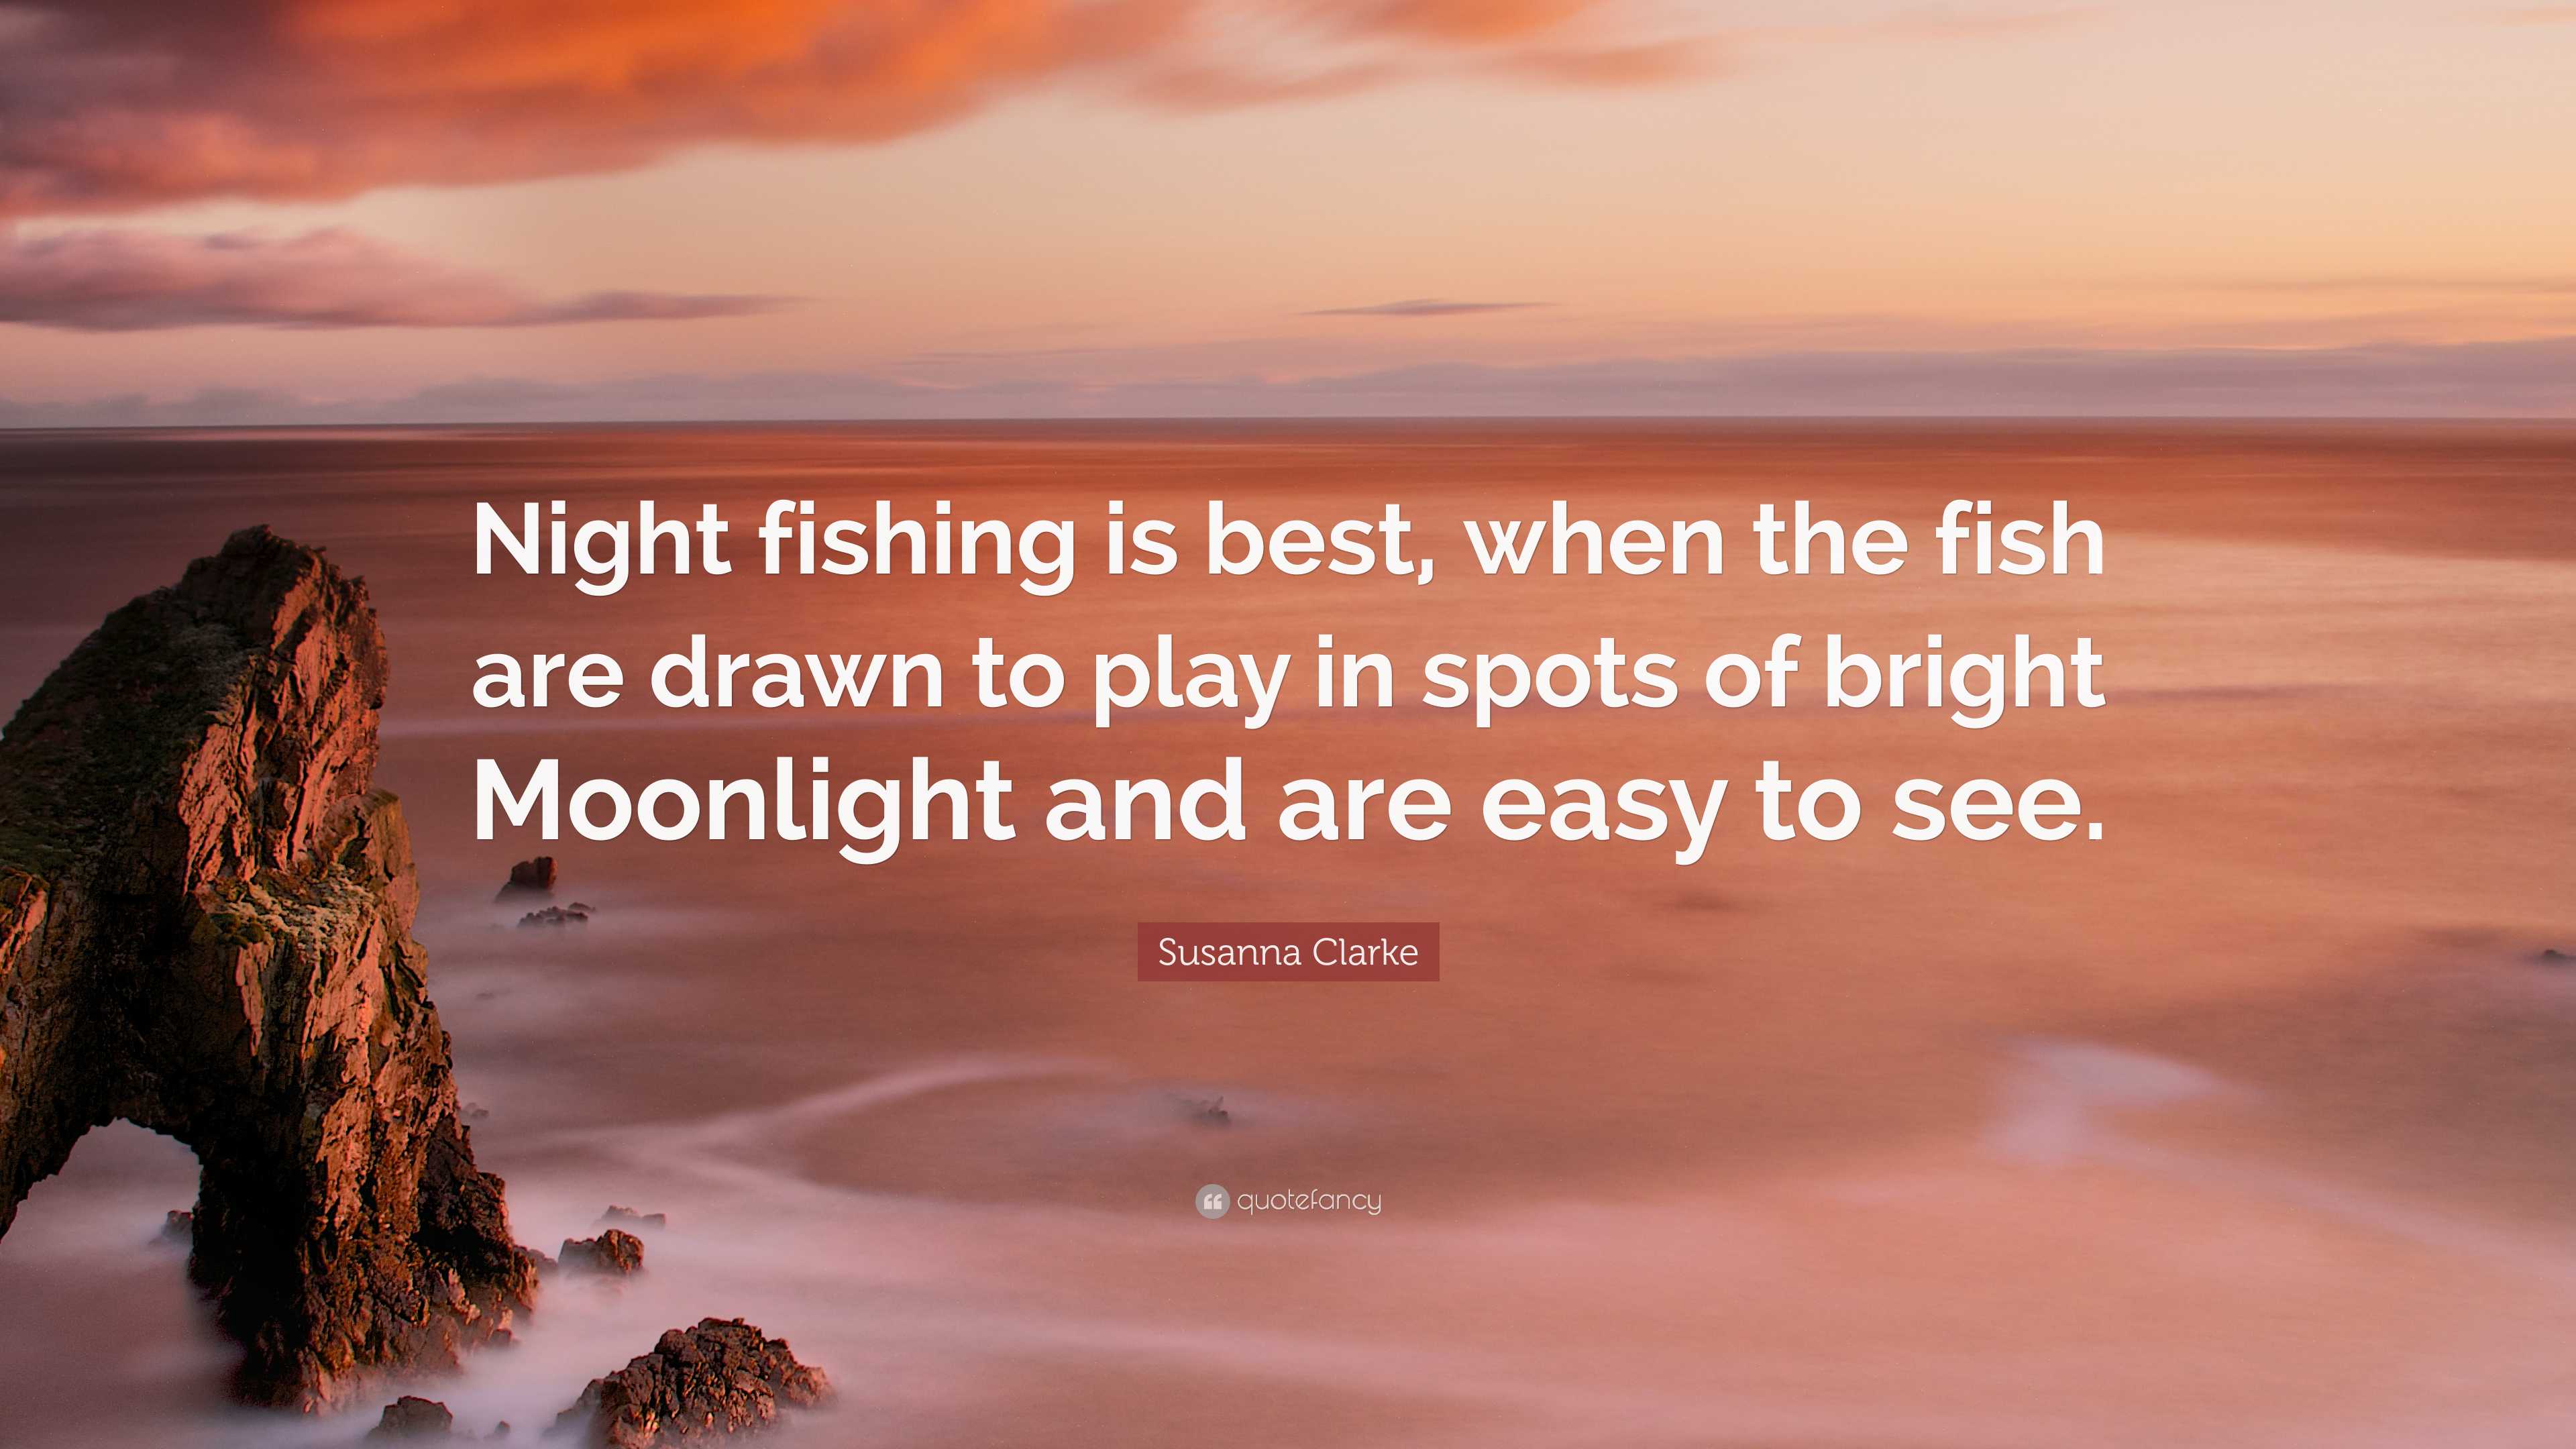 Susanna Clarke Quote: “Night fishing is best, when the fish are